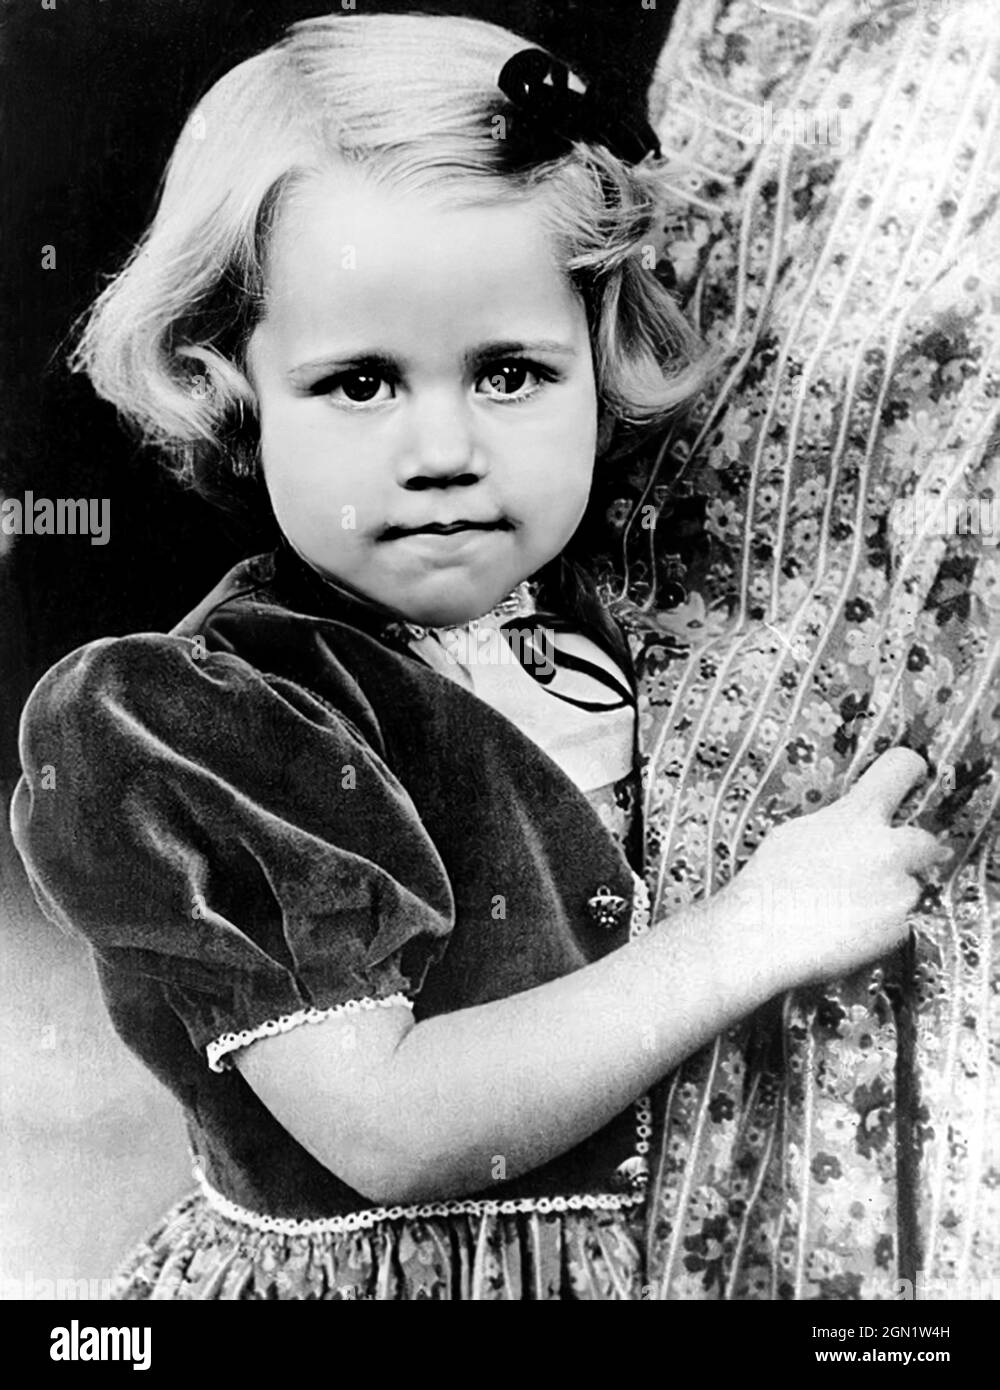 Daughter of henry fonda Black and White Stock Photos & Images - Alamy